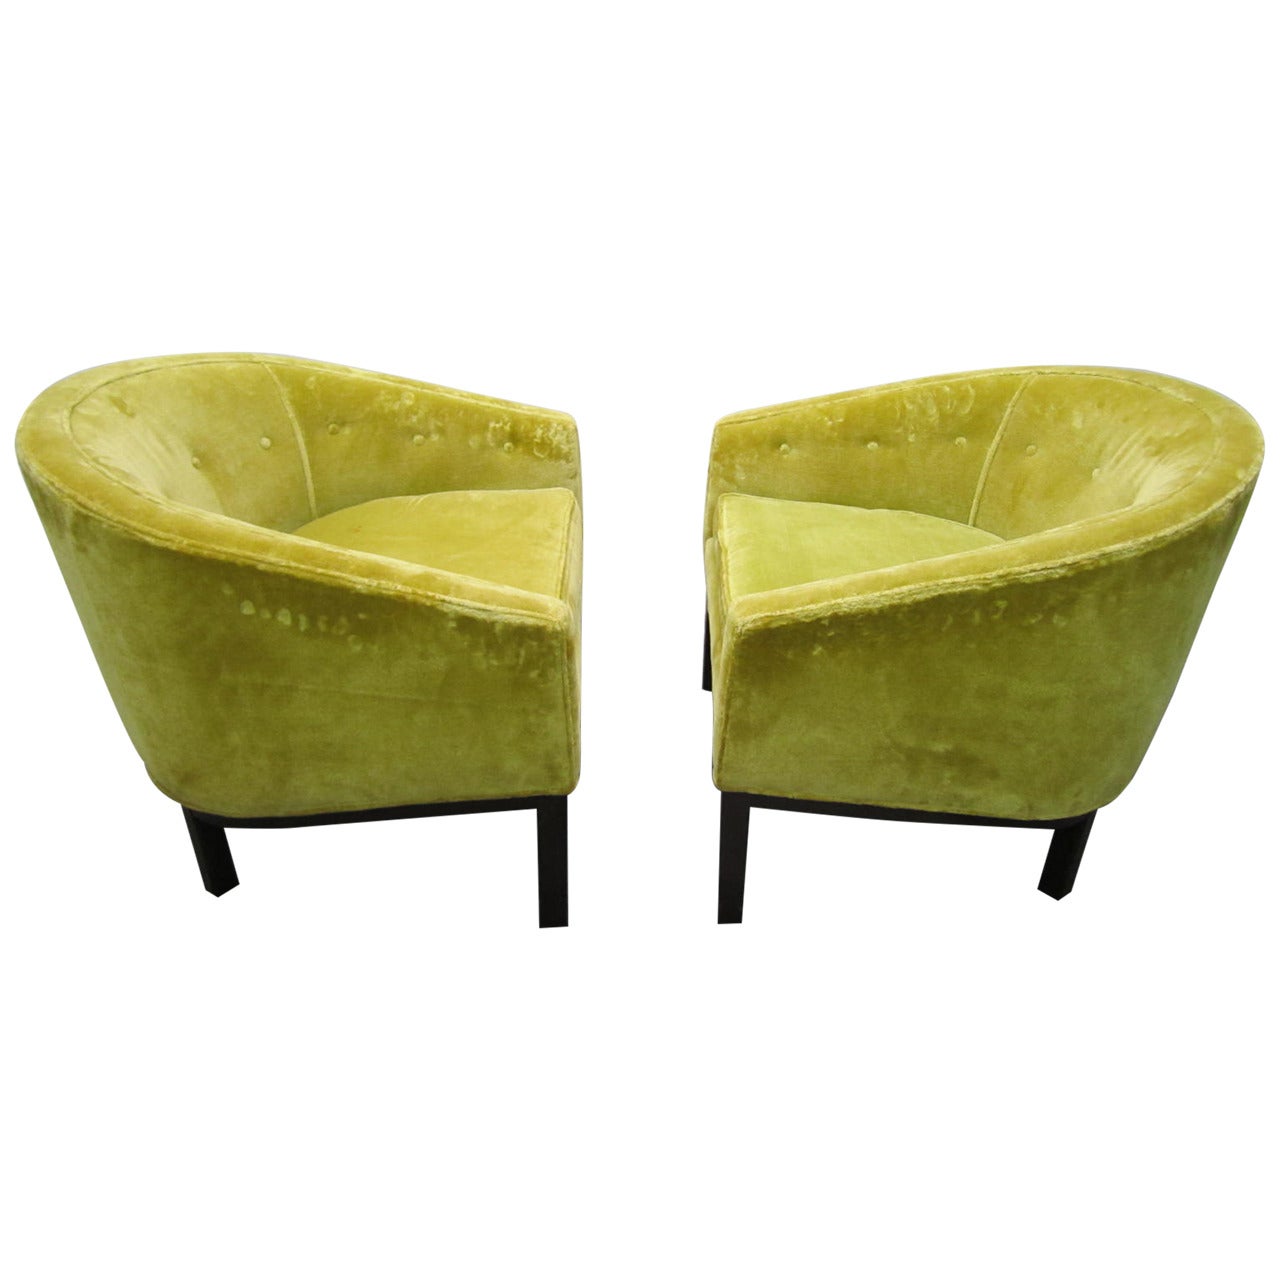 Fabulous Pair Harvey Probber Style Barrel Back Lounge Chairs Mid-century Modern For Sale